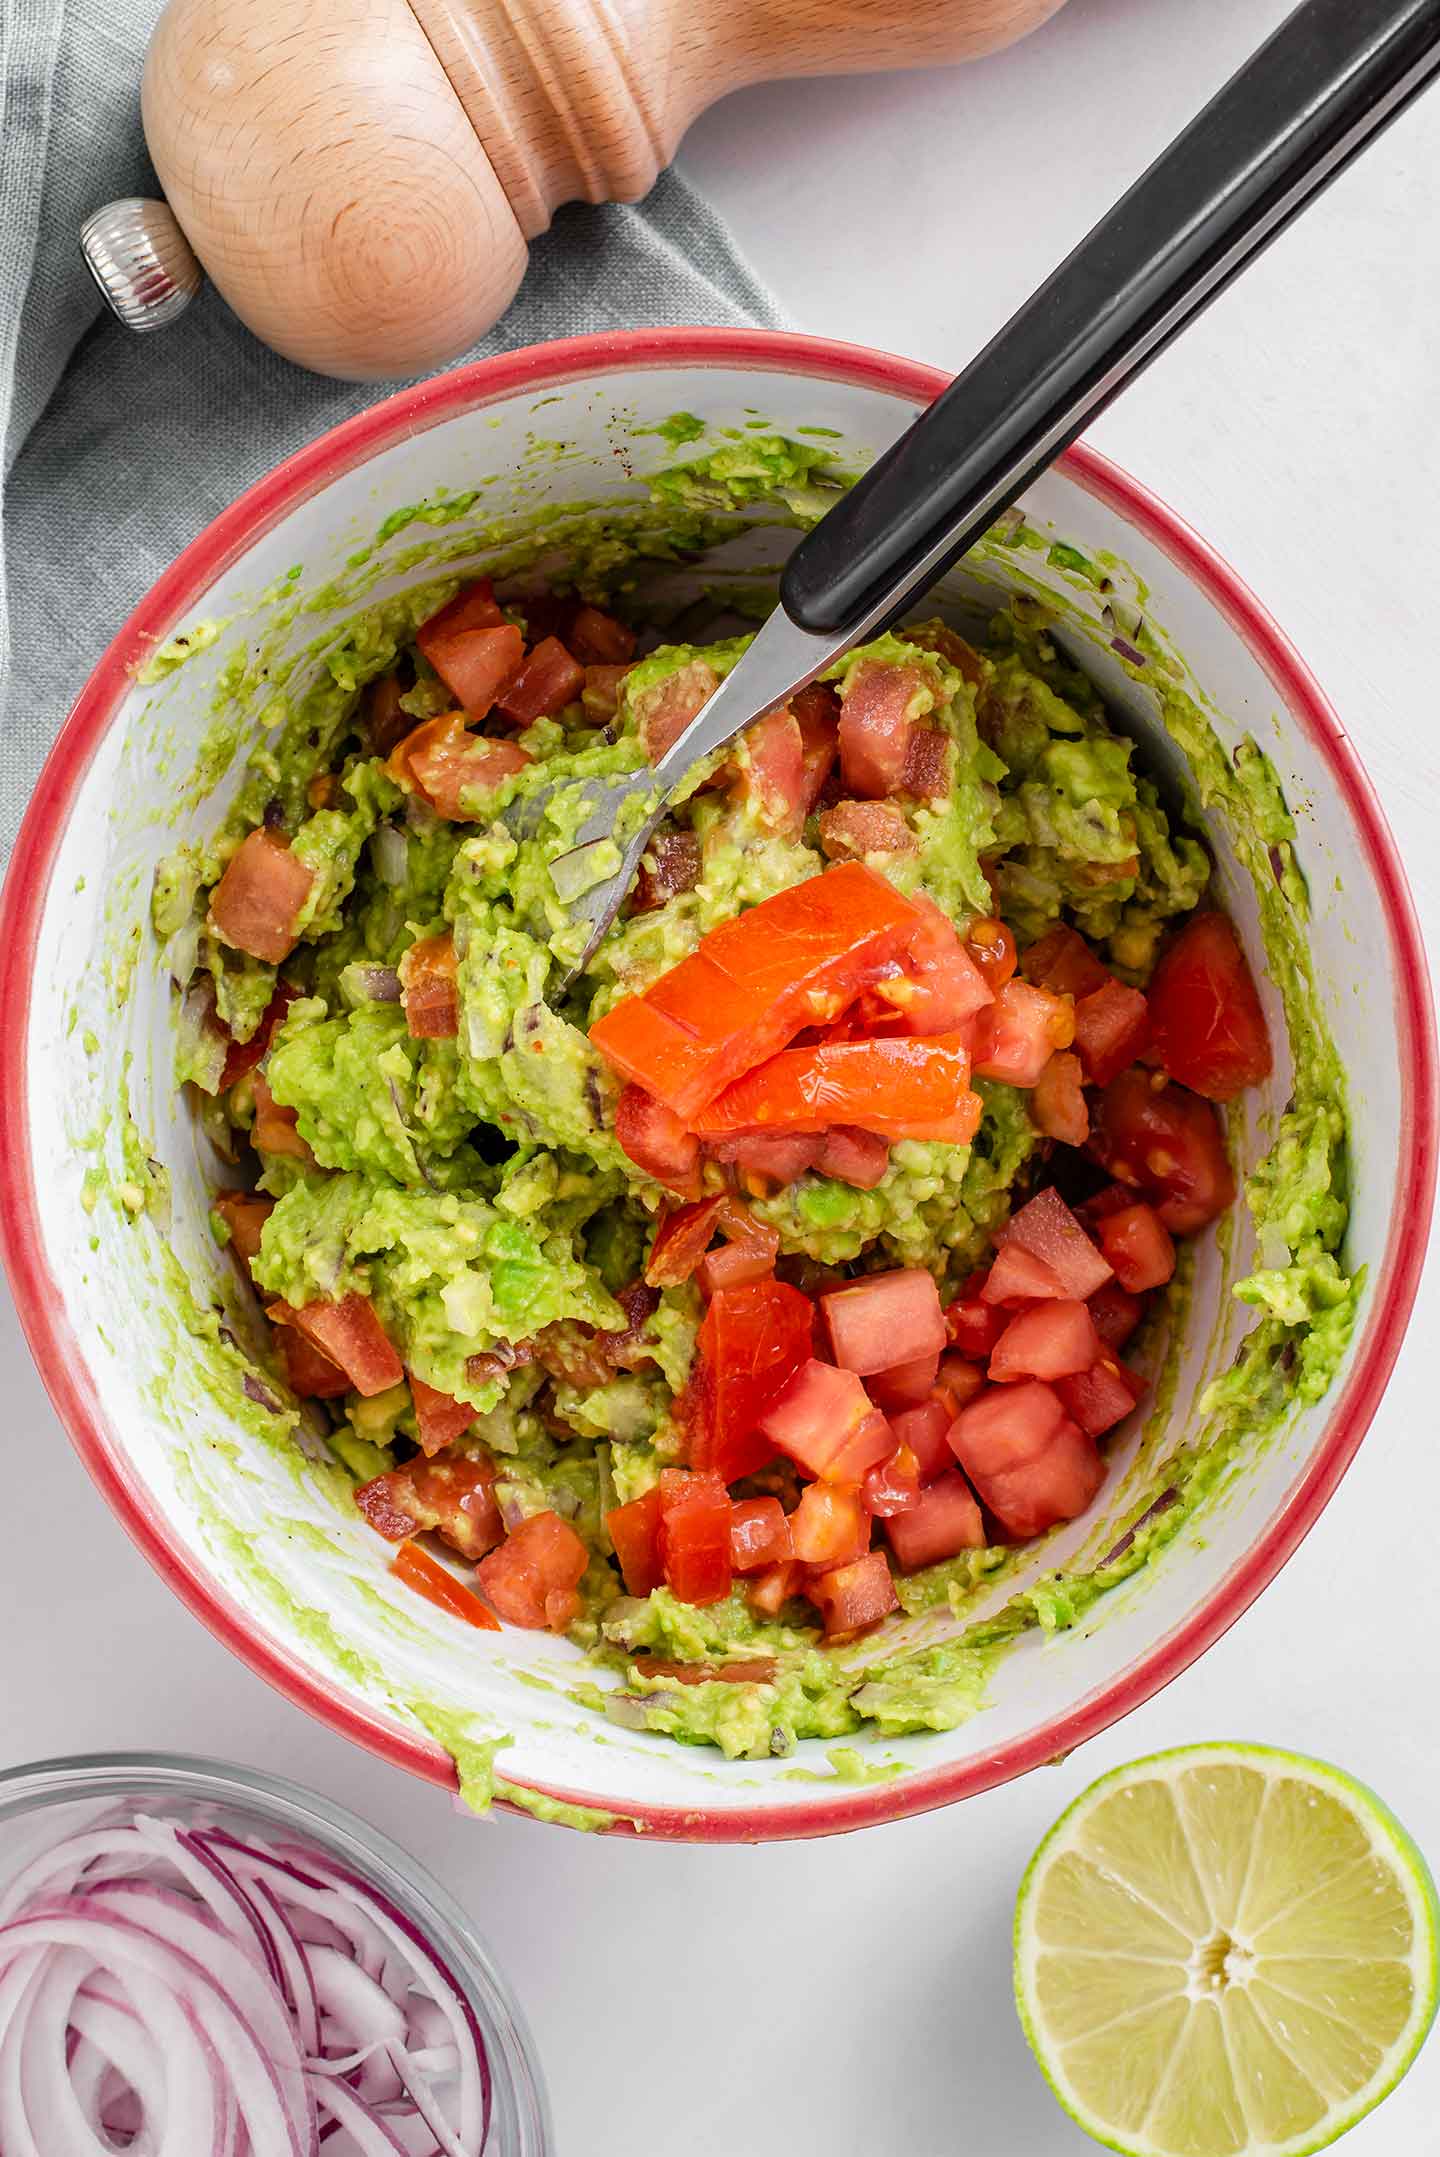 Top down view of mashed avocado in a bowl with diced tomato being stirred in.